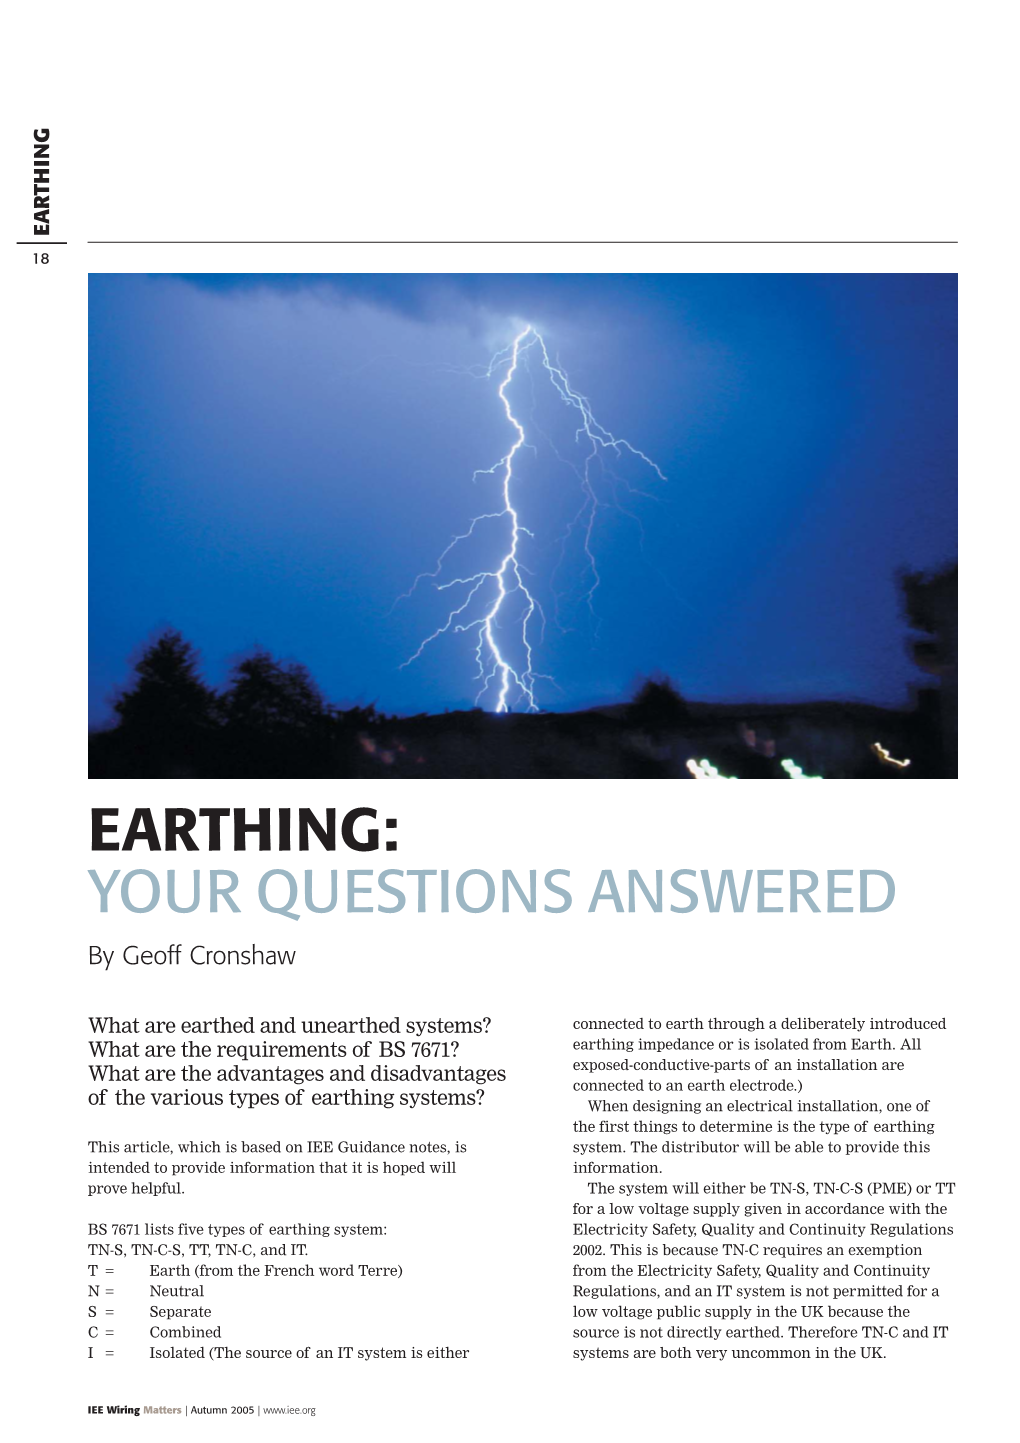 Earthing: Your Questions Answered